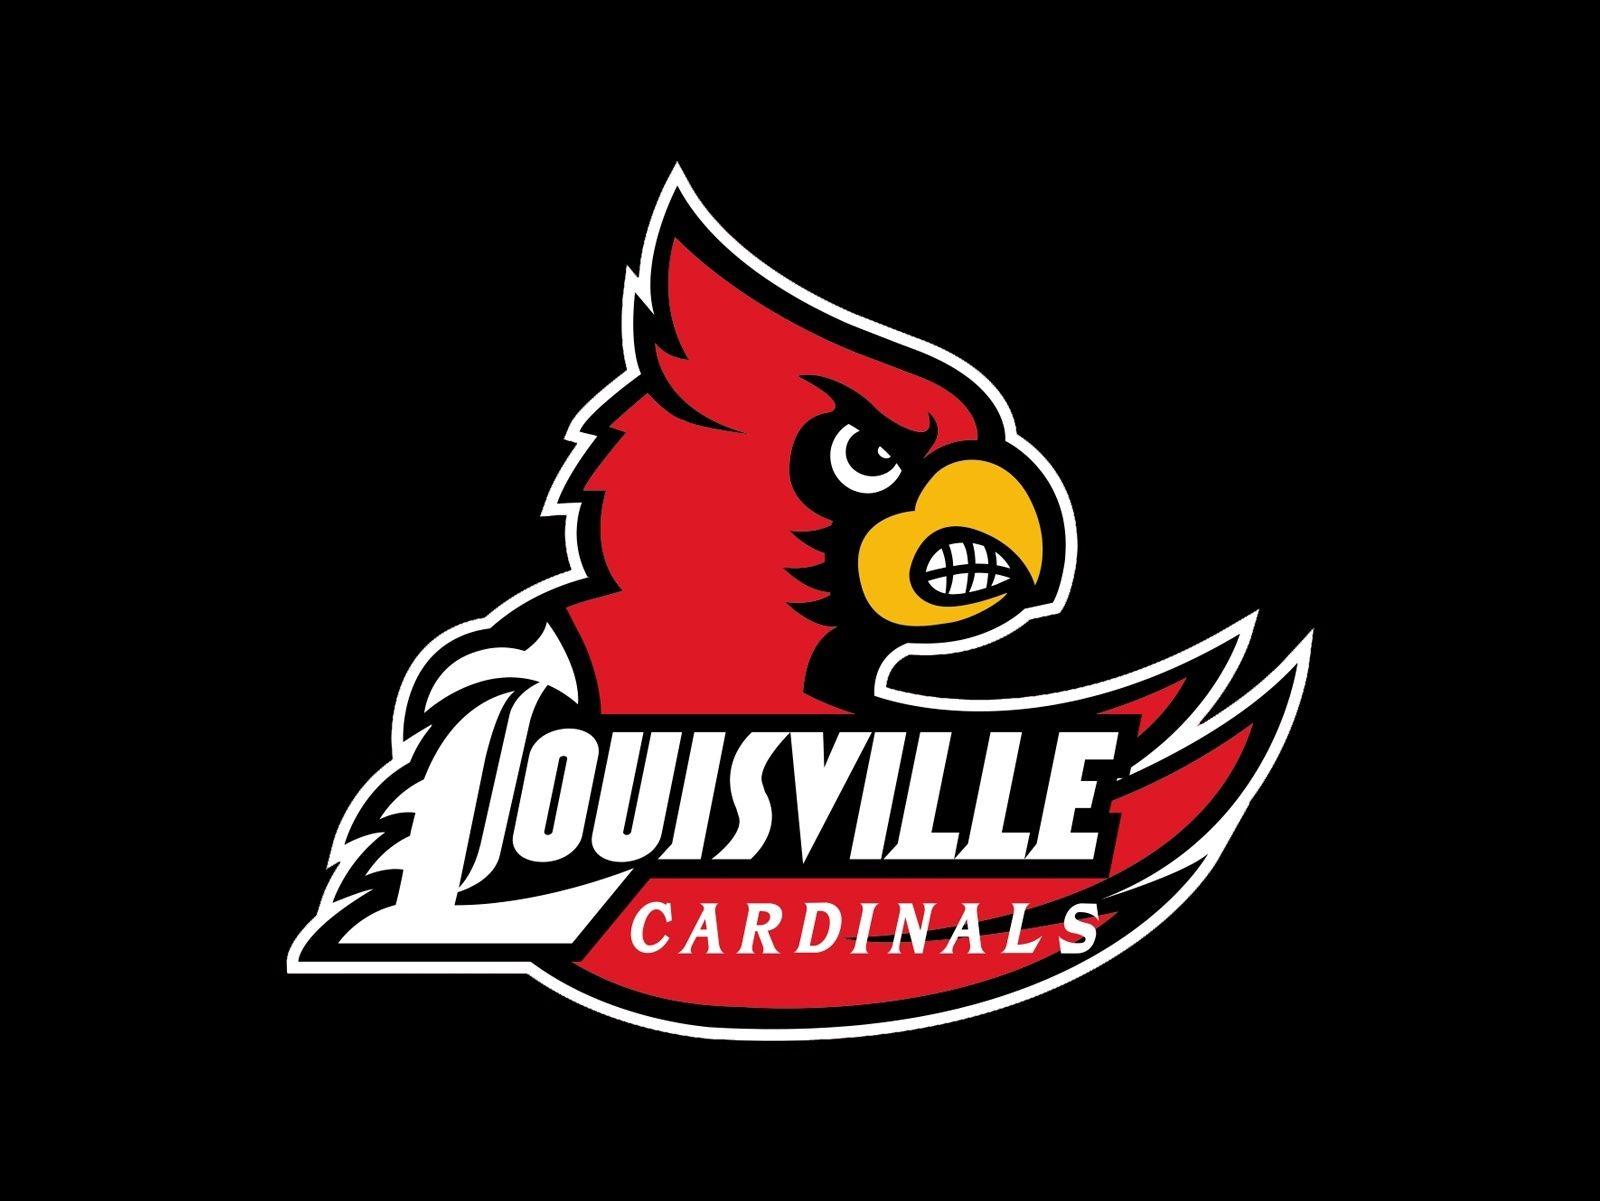 U of L Cardinal Logo - Sprint Freestyler Grace Long Verbally Commits to Louisville Cardinals